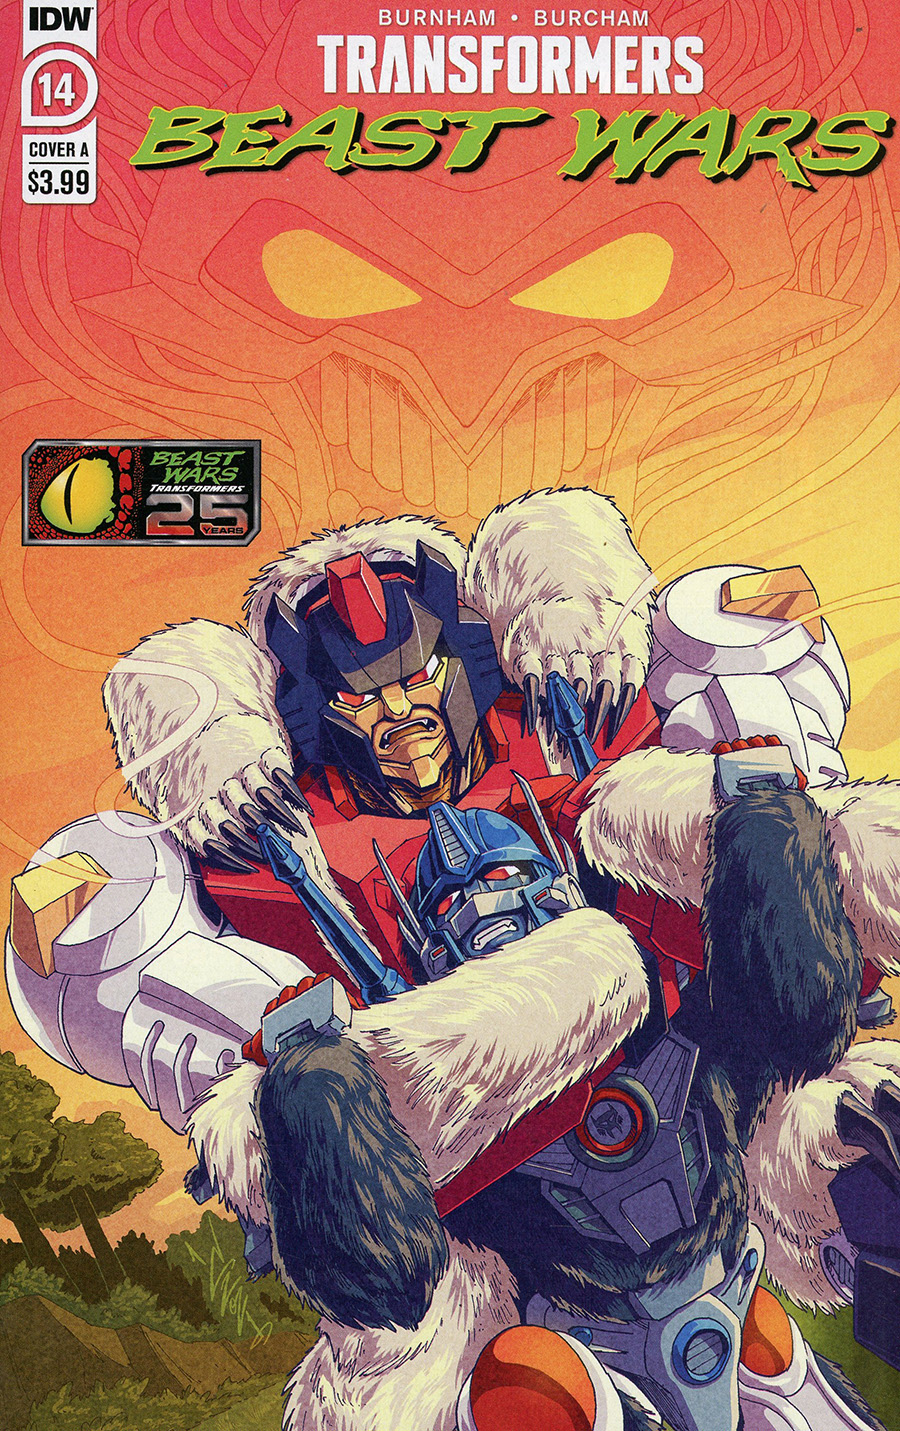 Transformers Beast Wars Vol 2 #14 Cover A Regular Winston Chan Cover